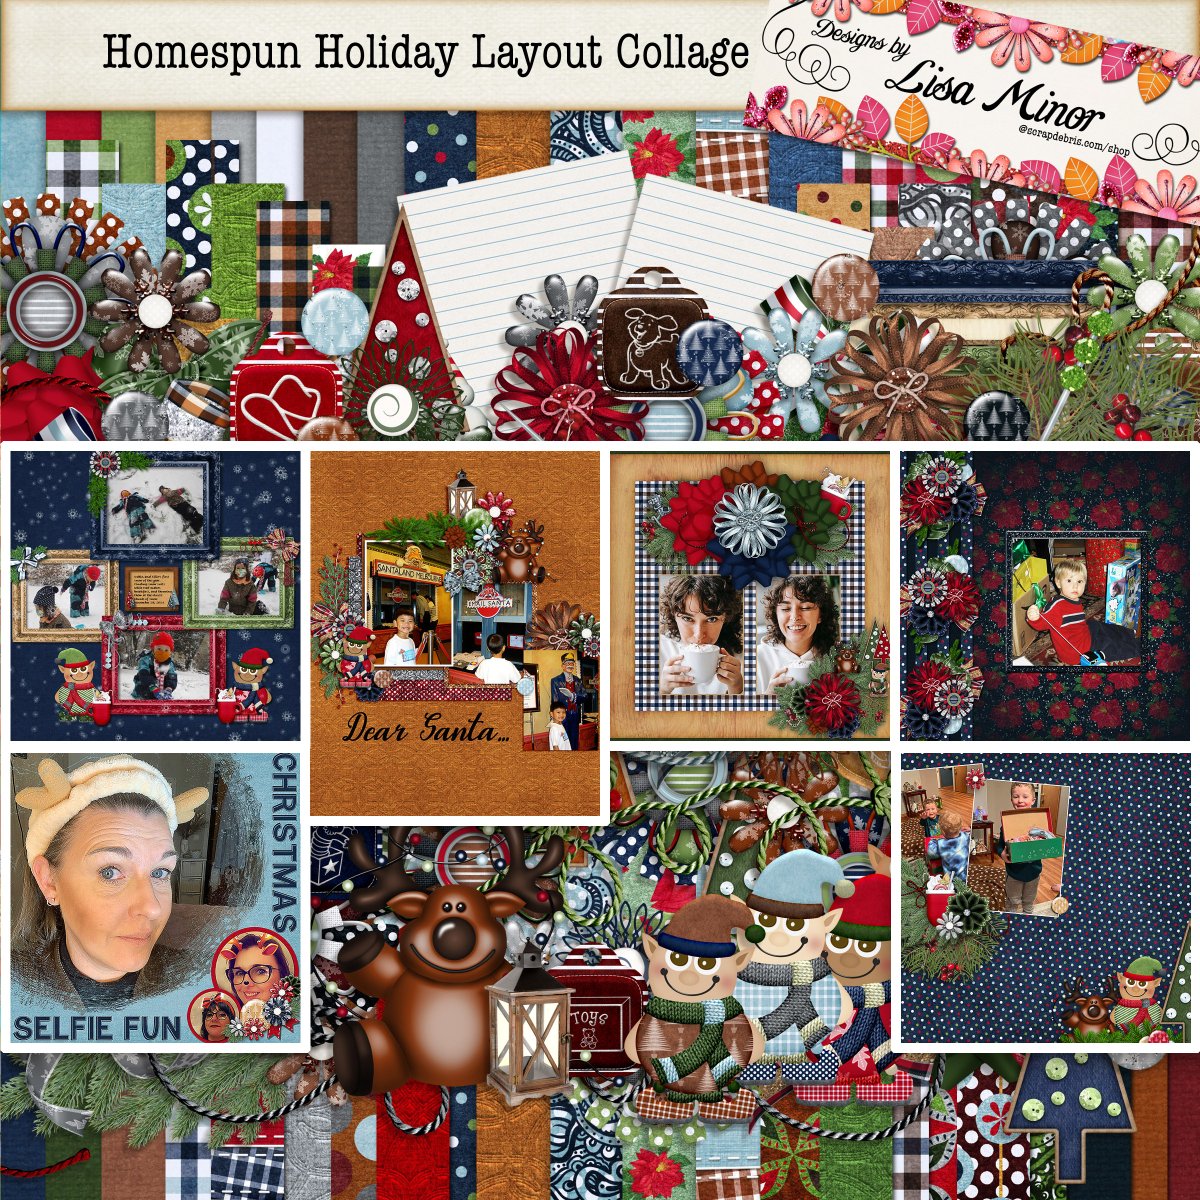 Homespun Holiday Scrapbook Page Layout Collage
@GingerScraps -https://t.co/DBlDQ87Cgf
@MyMemoriesSuite -https://t.co/p9aq7drTKR
@Scrapdebris -https://t.co/5YDjKovnu5 https://t.co/8zm9OpIAO5